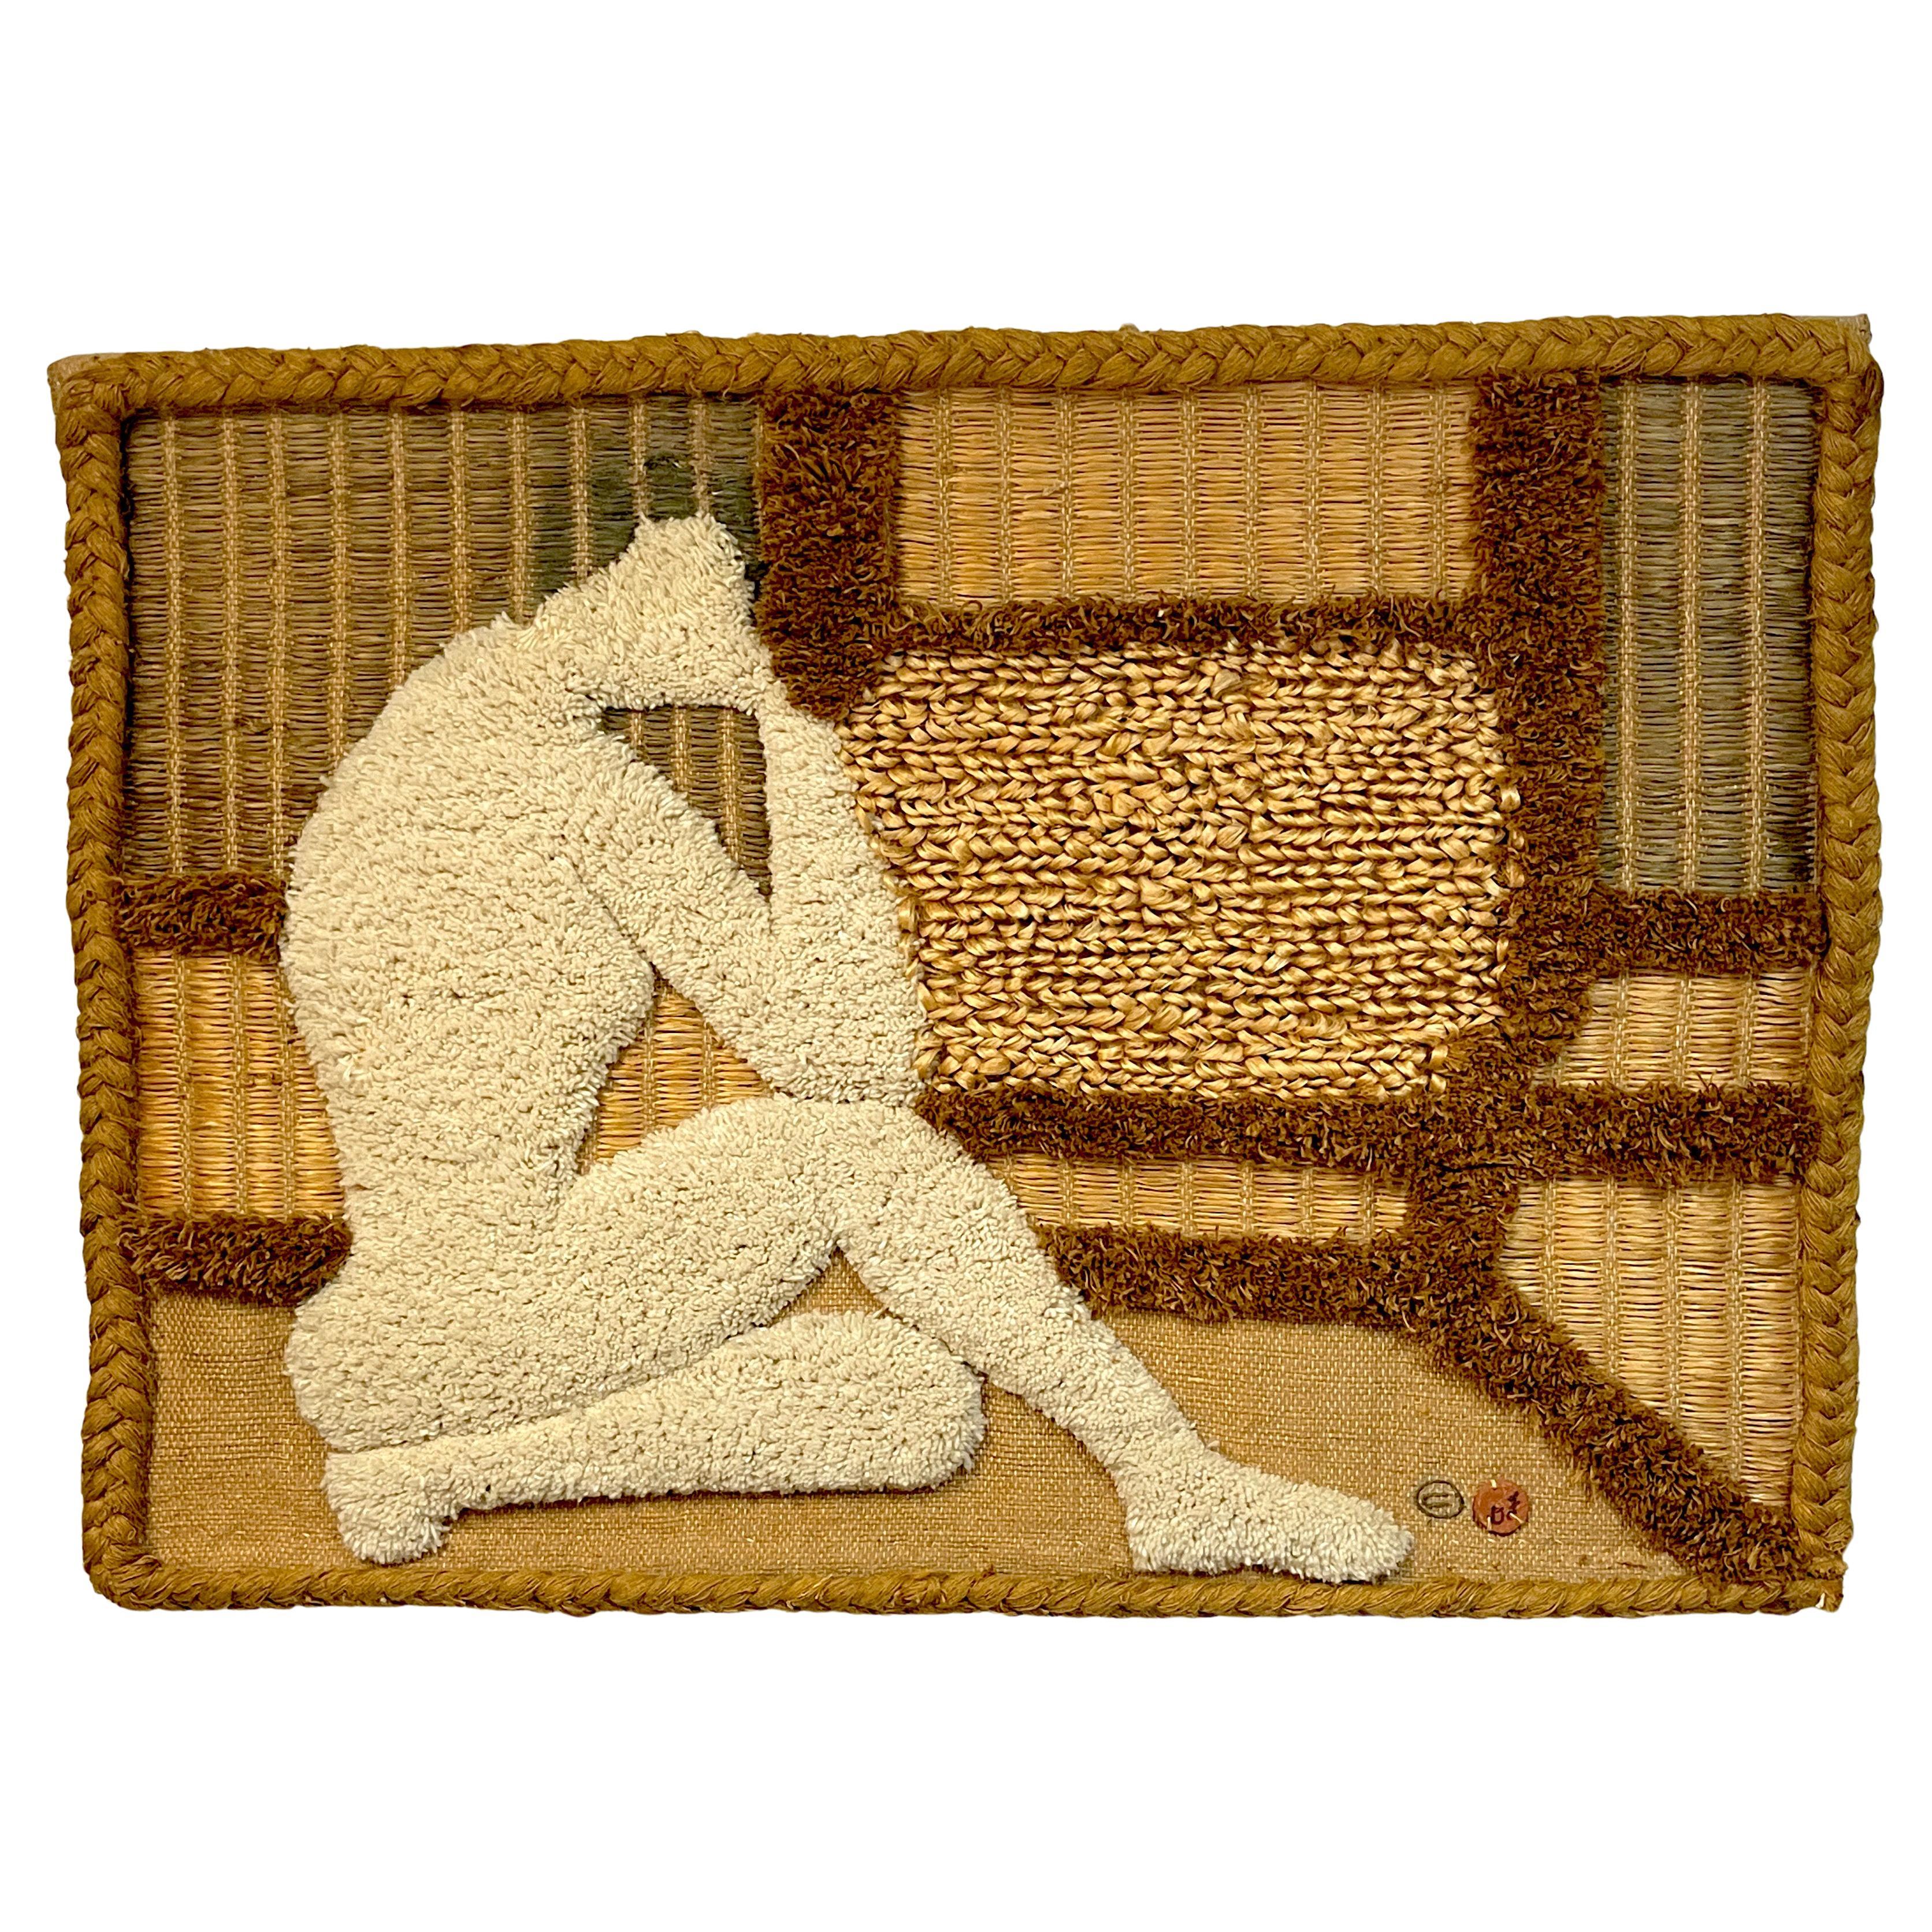 Natural Fiber Art Wall Tapestry 'Seated Nude' by Don Freedman, 1978